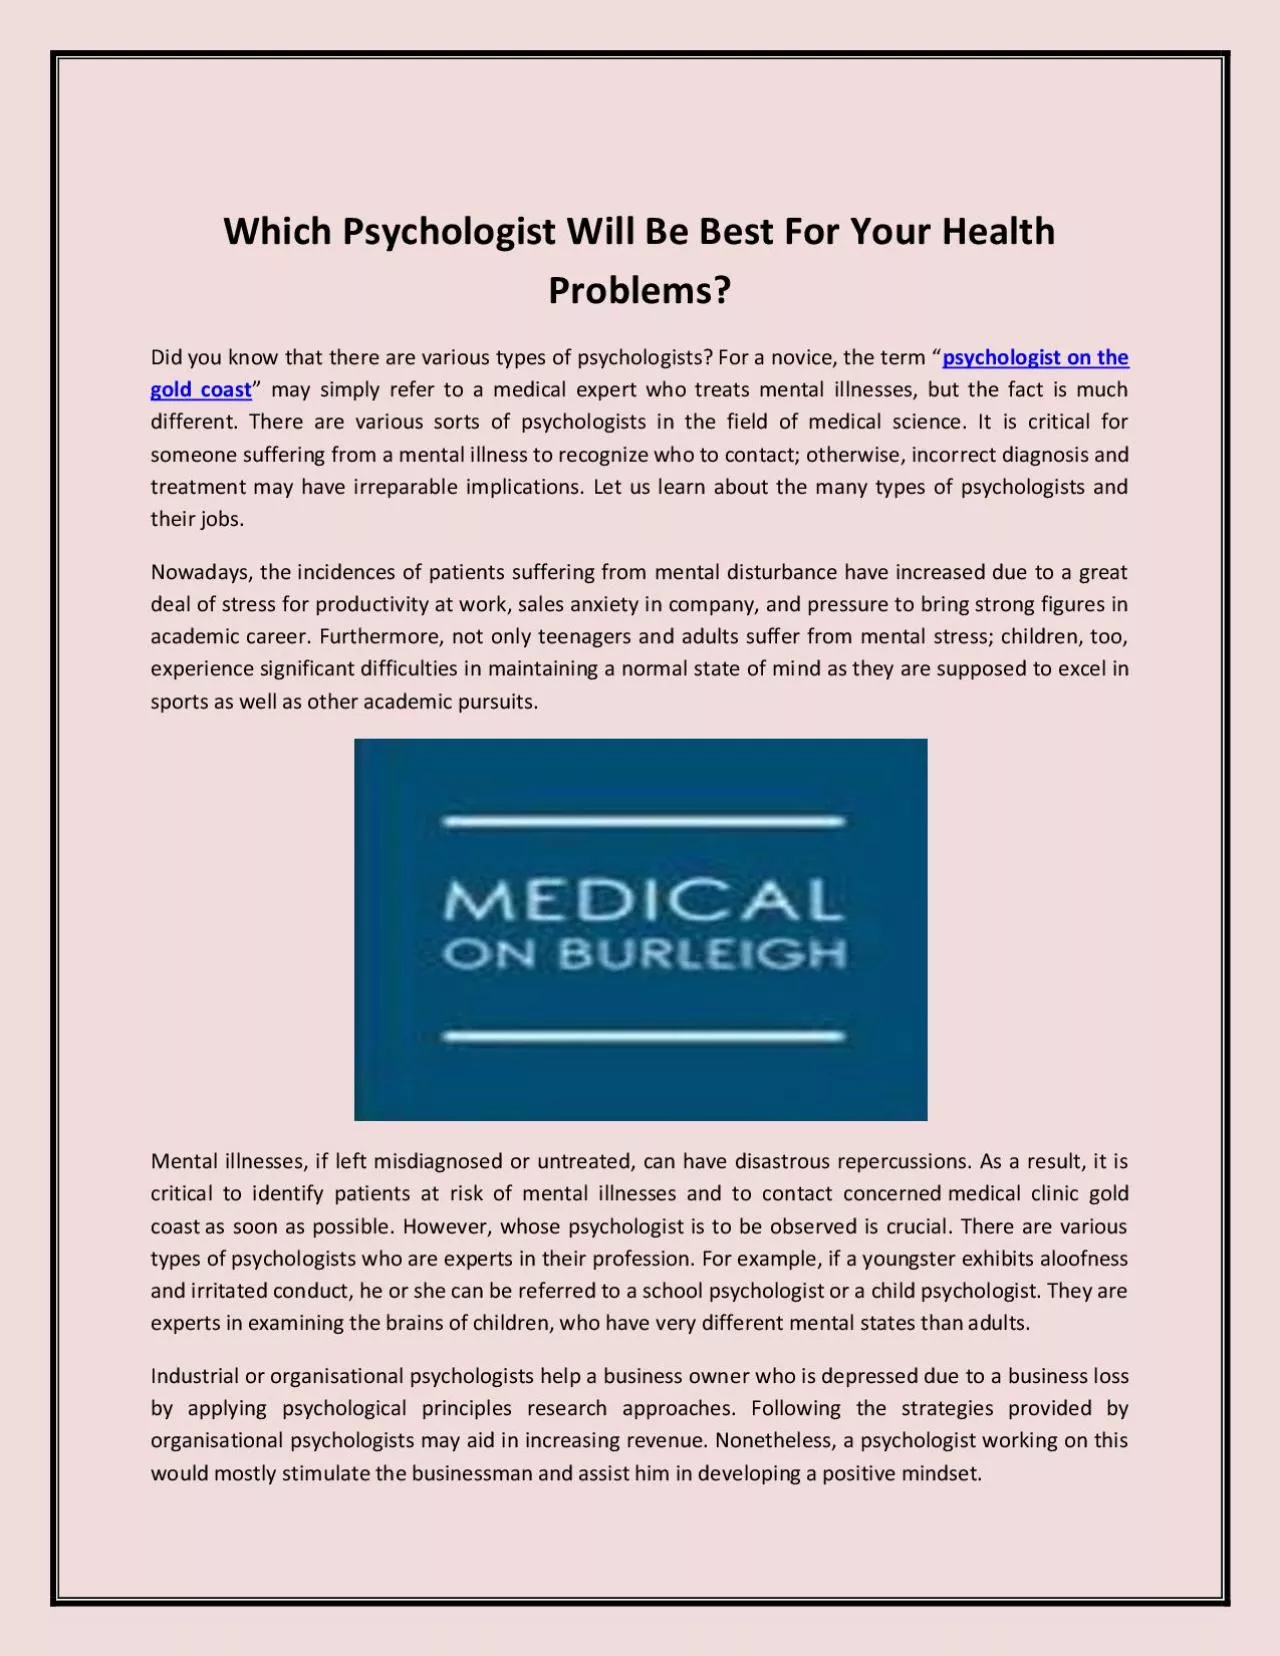 Which Psychologist Will Be Best For Your Health Problems?